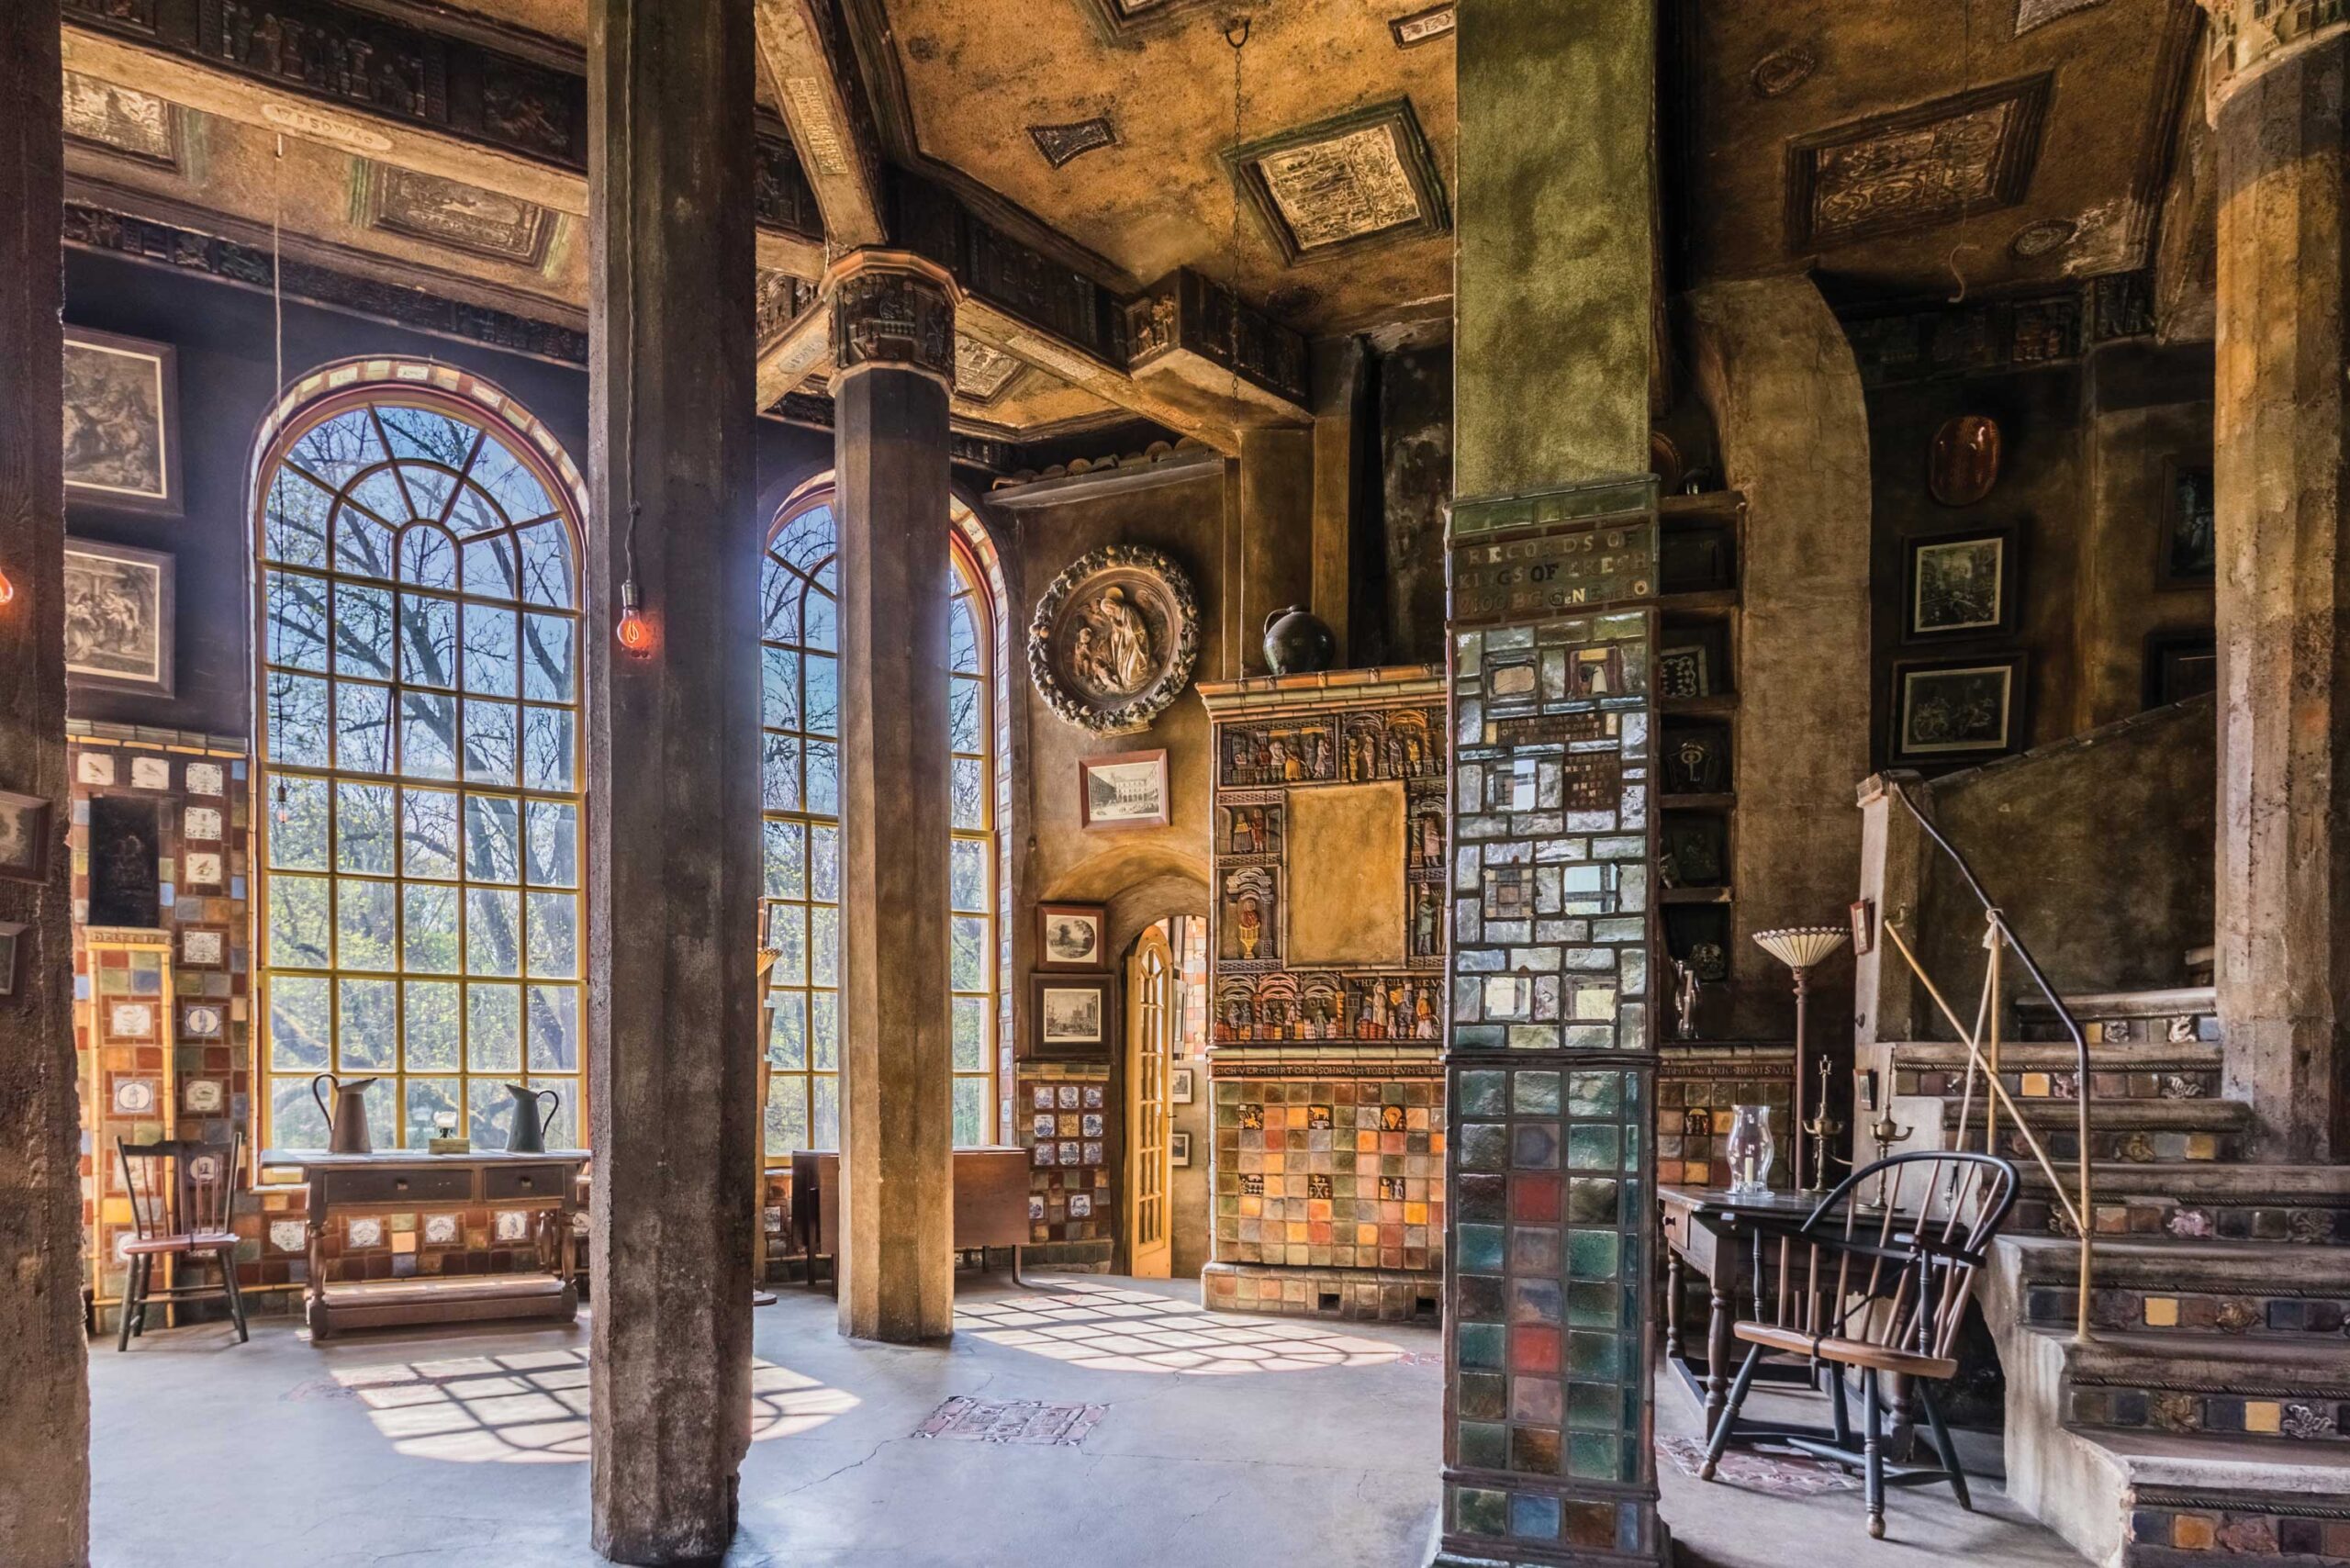 The saloon at Henry Chapman Mercer’s Fonthill Castle, Doylestown, Pennsylvania, photo: Kevin Crawford, courtesy Mercer Museum and Fonthill Castle of the Bucks County Historical Society